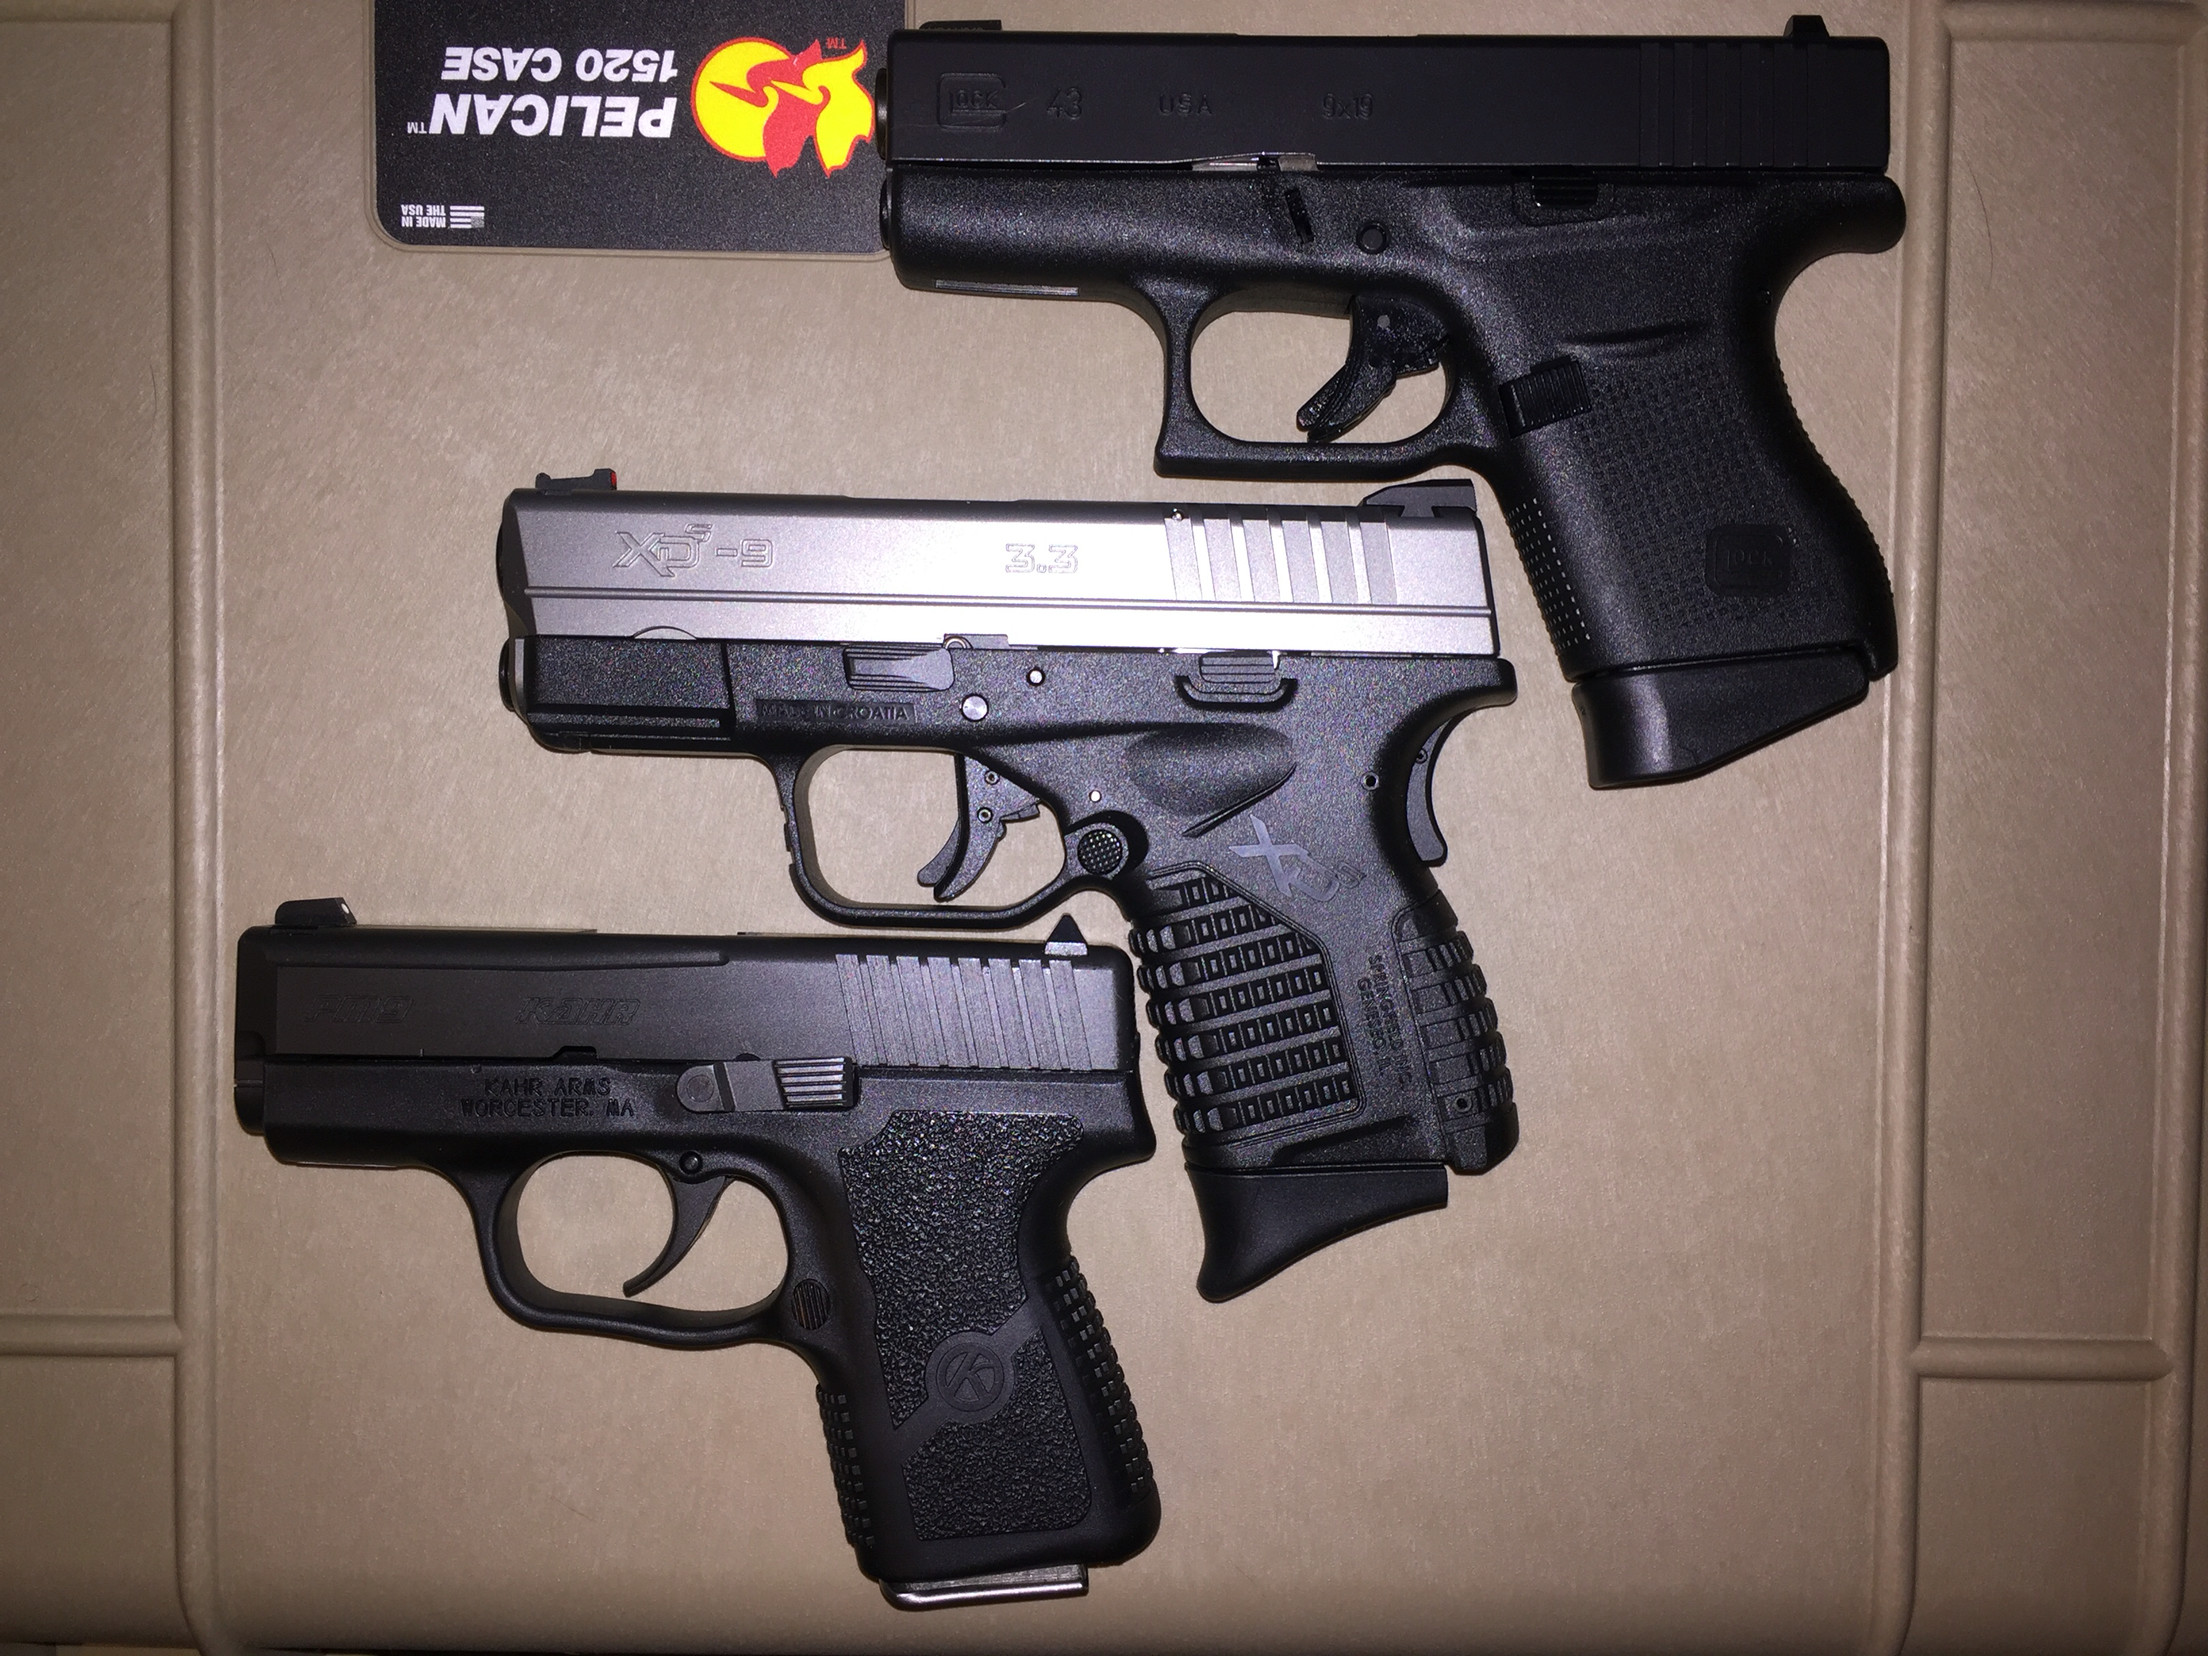 2208x1656 Glock 43 vs XDs 9 vs Kahr PM9 Loading that magazine is a pain! 